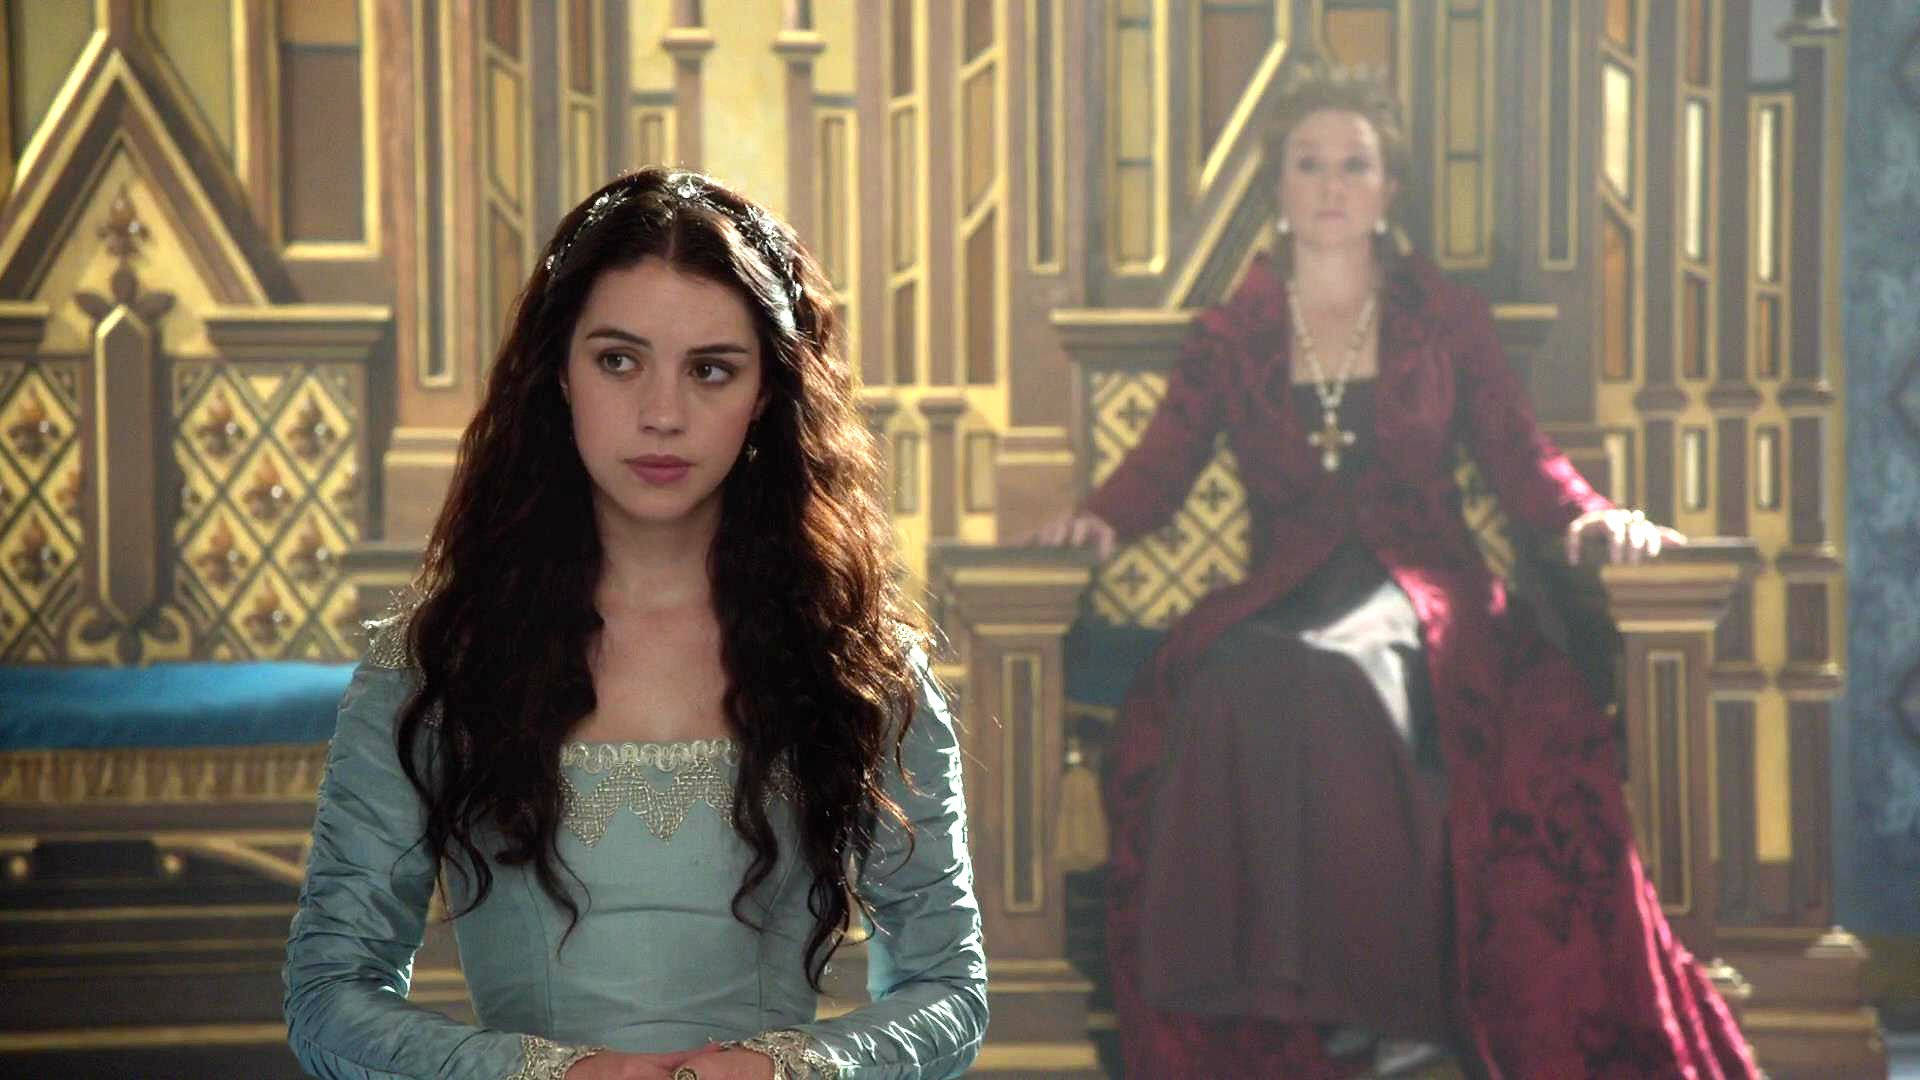 Royal Rivalries - Mary Stuart and Queen Catherine in The Drama Series 